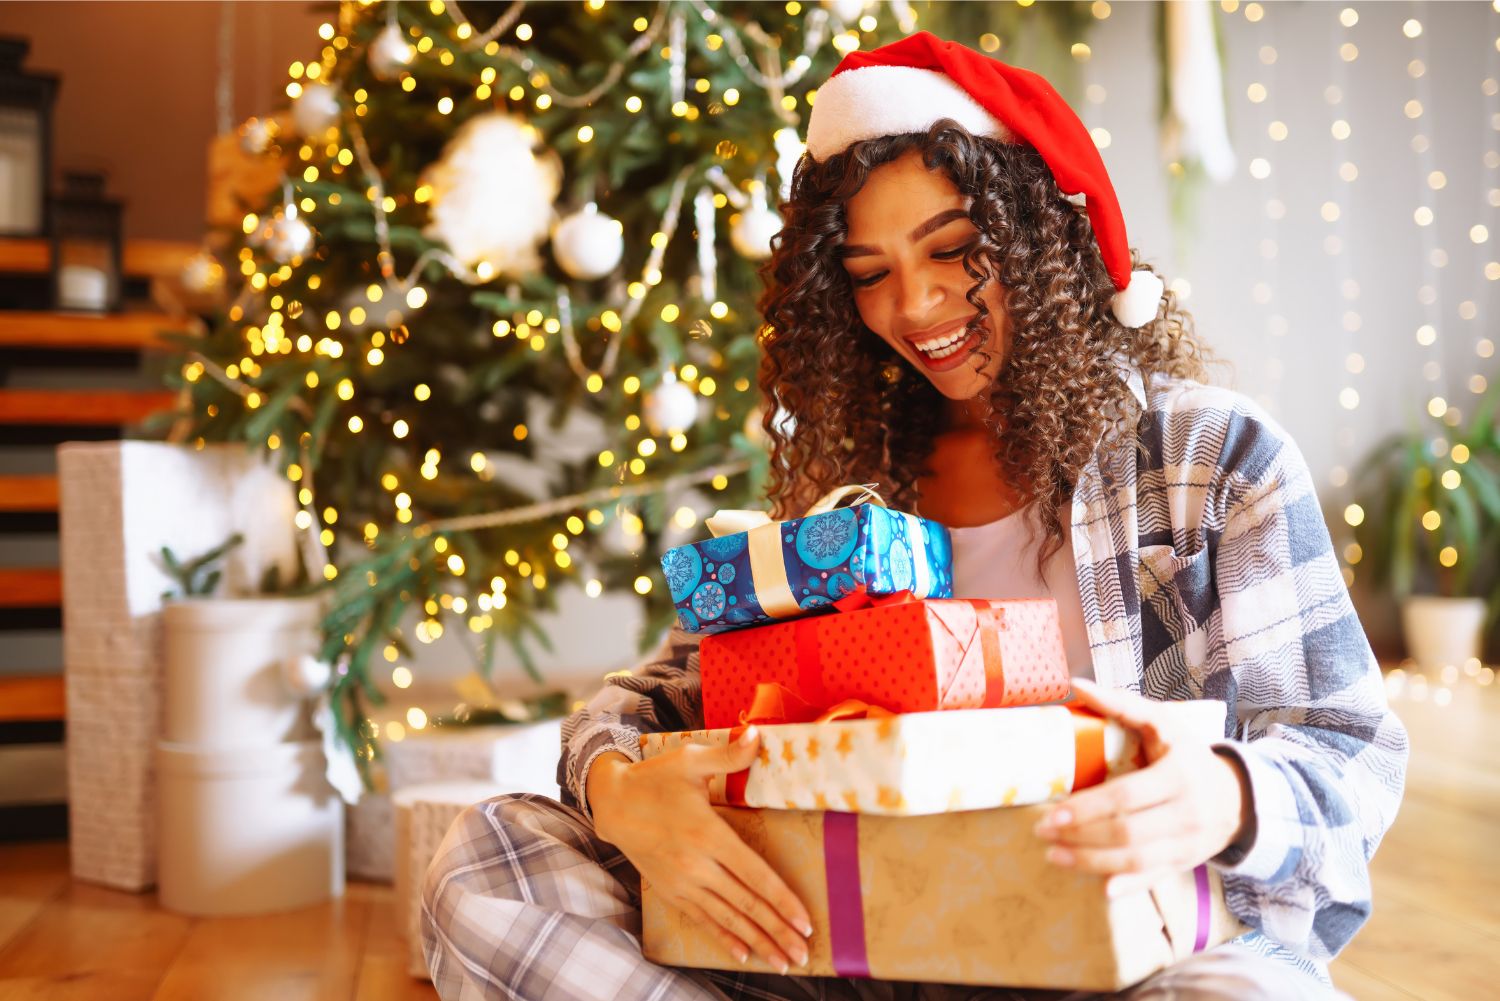 10 Healthy Gifts For The Holidays According To A Dietitian